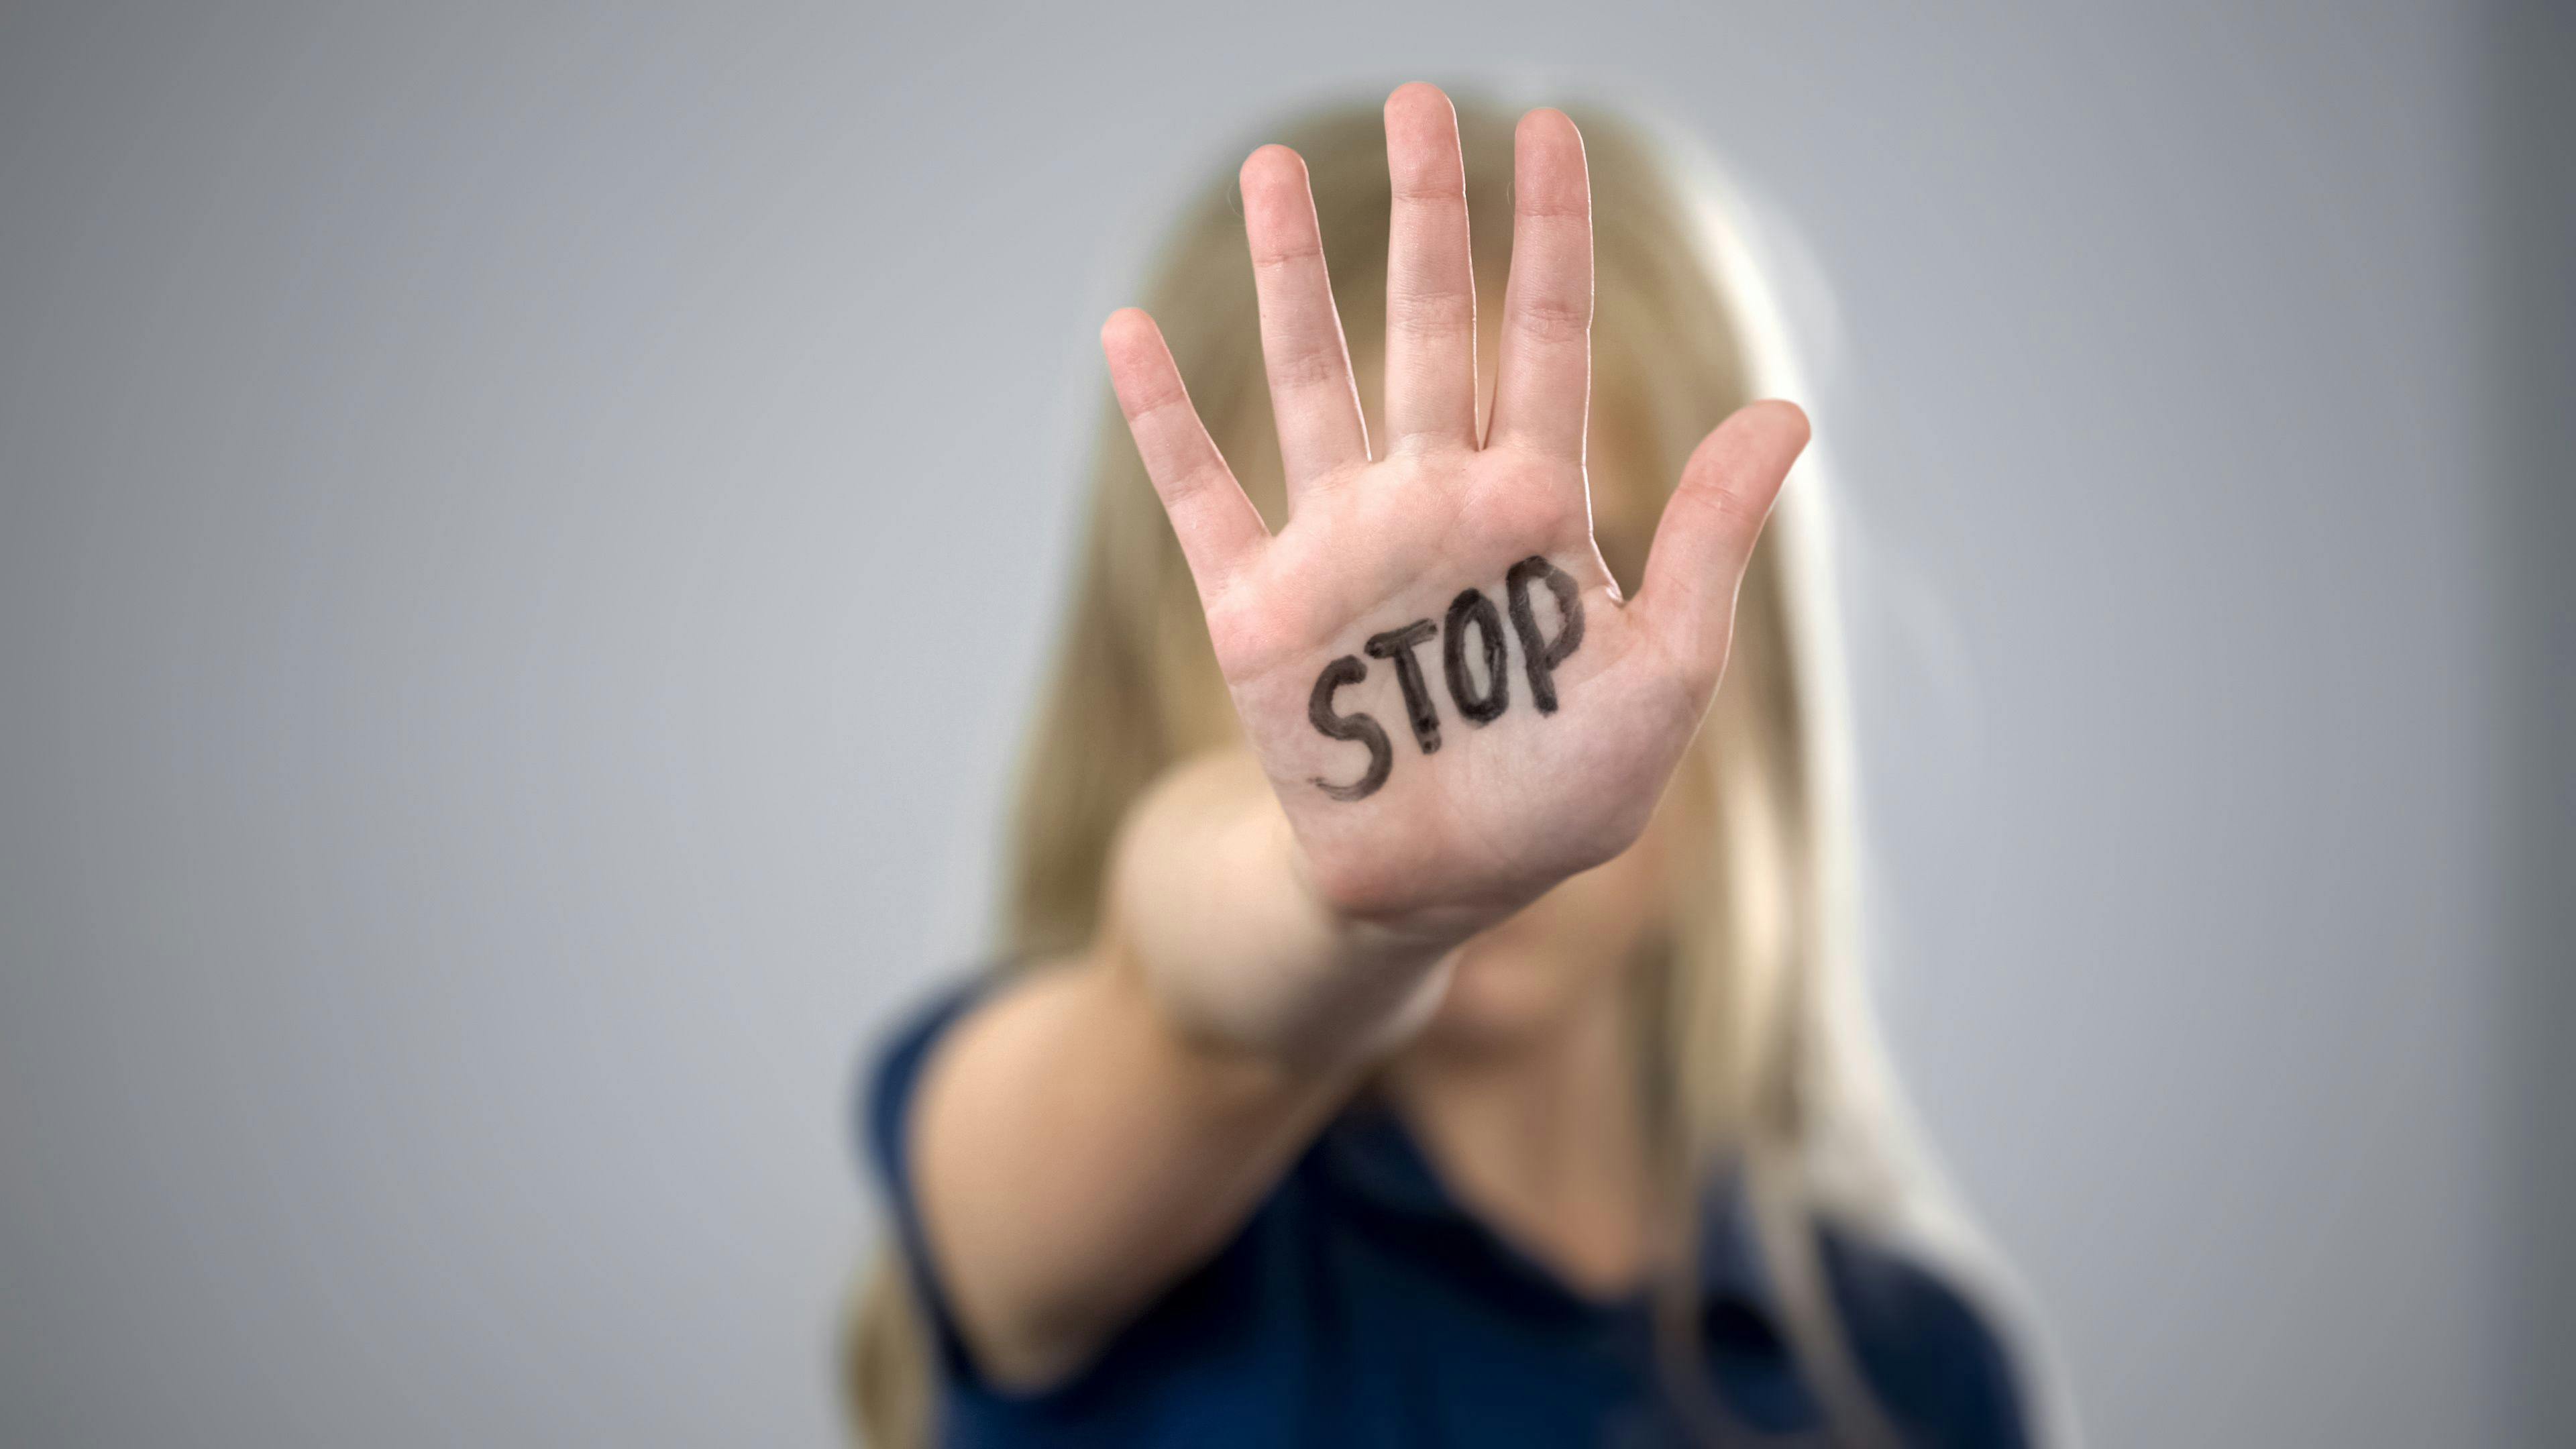 Child holding up hand with the word "STOP" | Image Credit: © motortion - © motortion - stock.adobe.com.